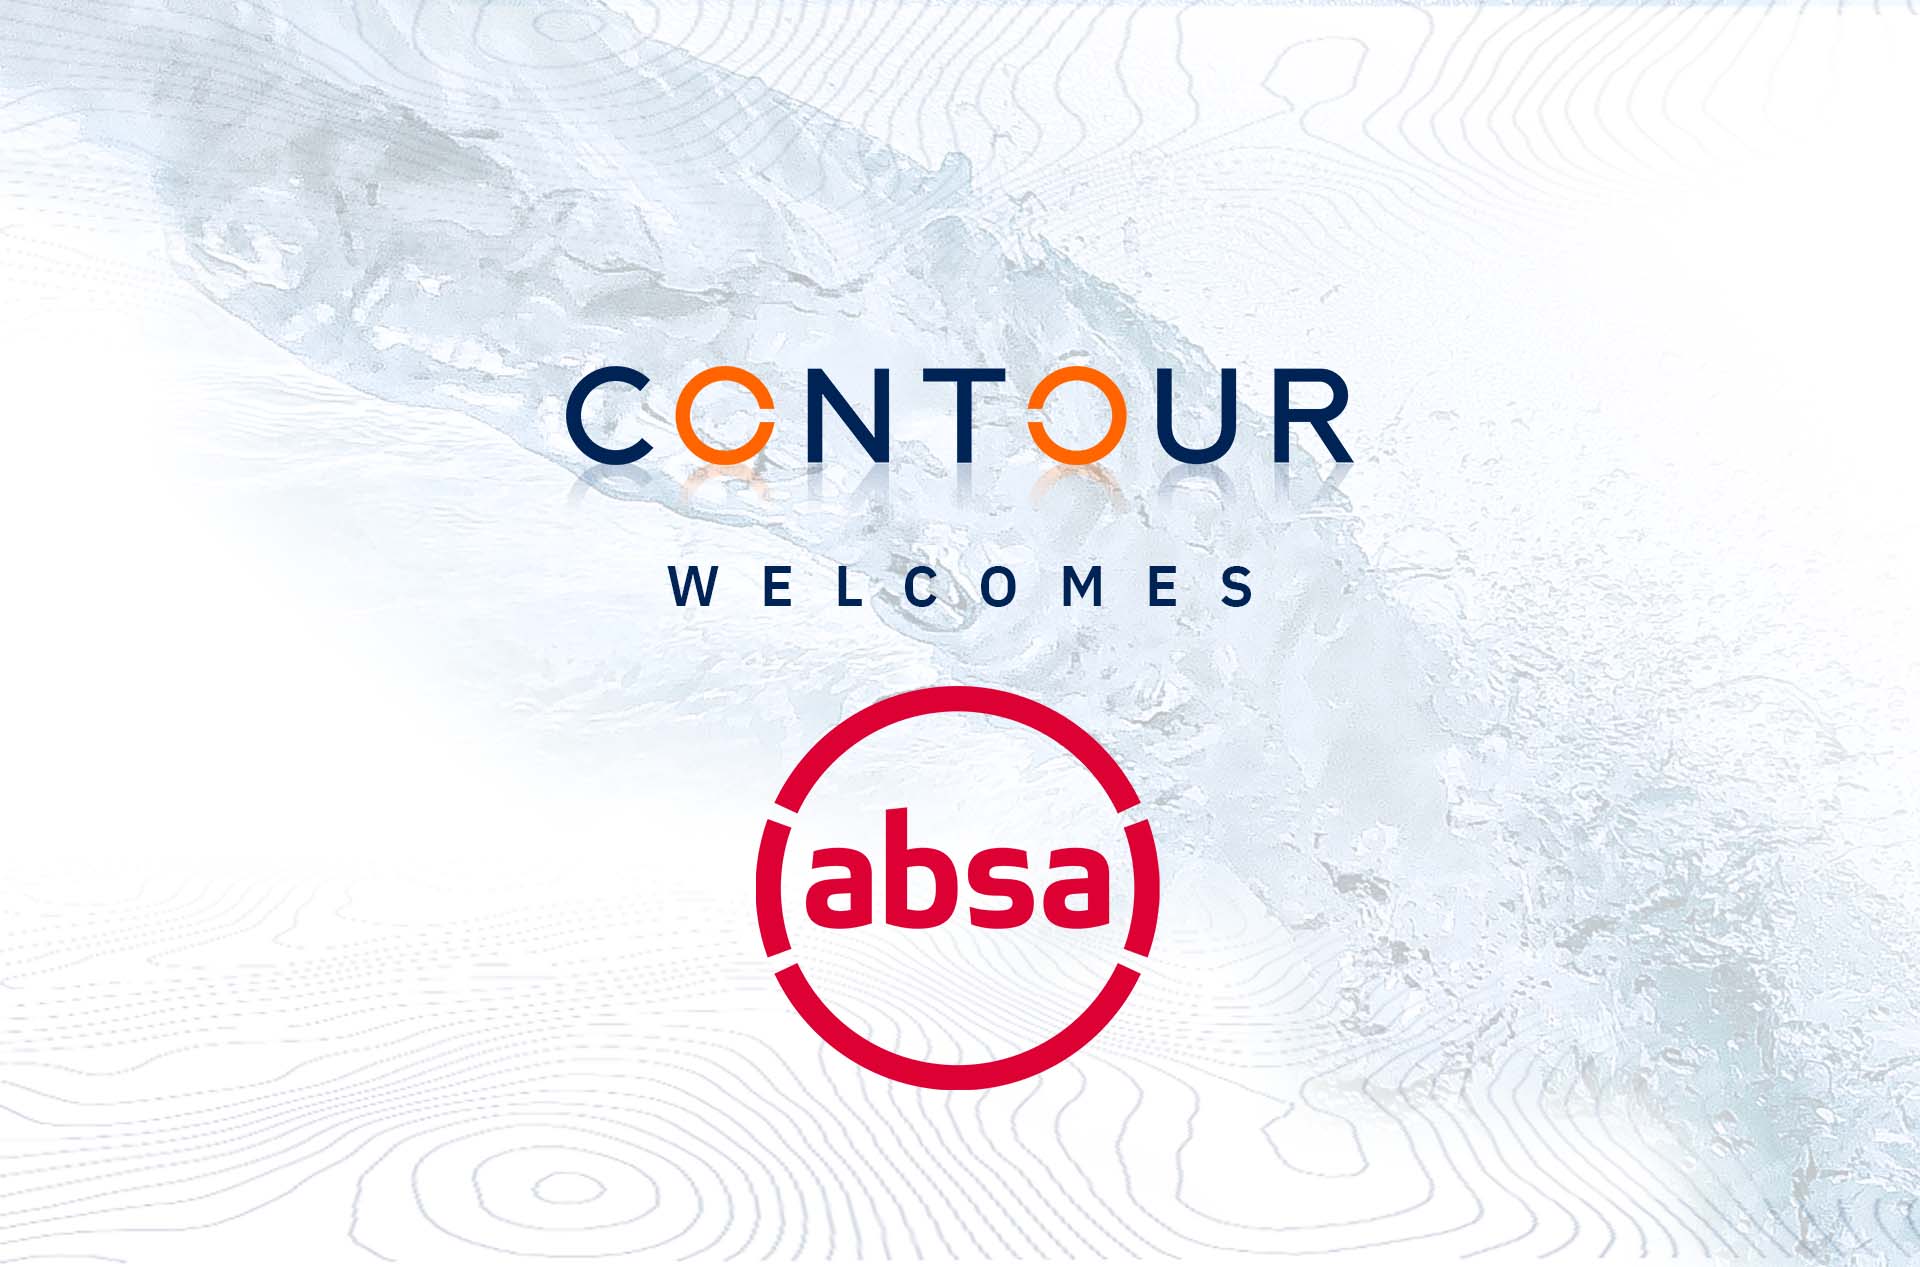 Absa CIB banks on digital trade, becoming first African bank to join Contour’s production network